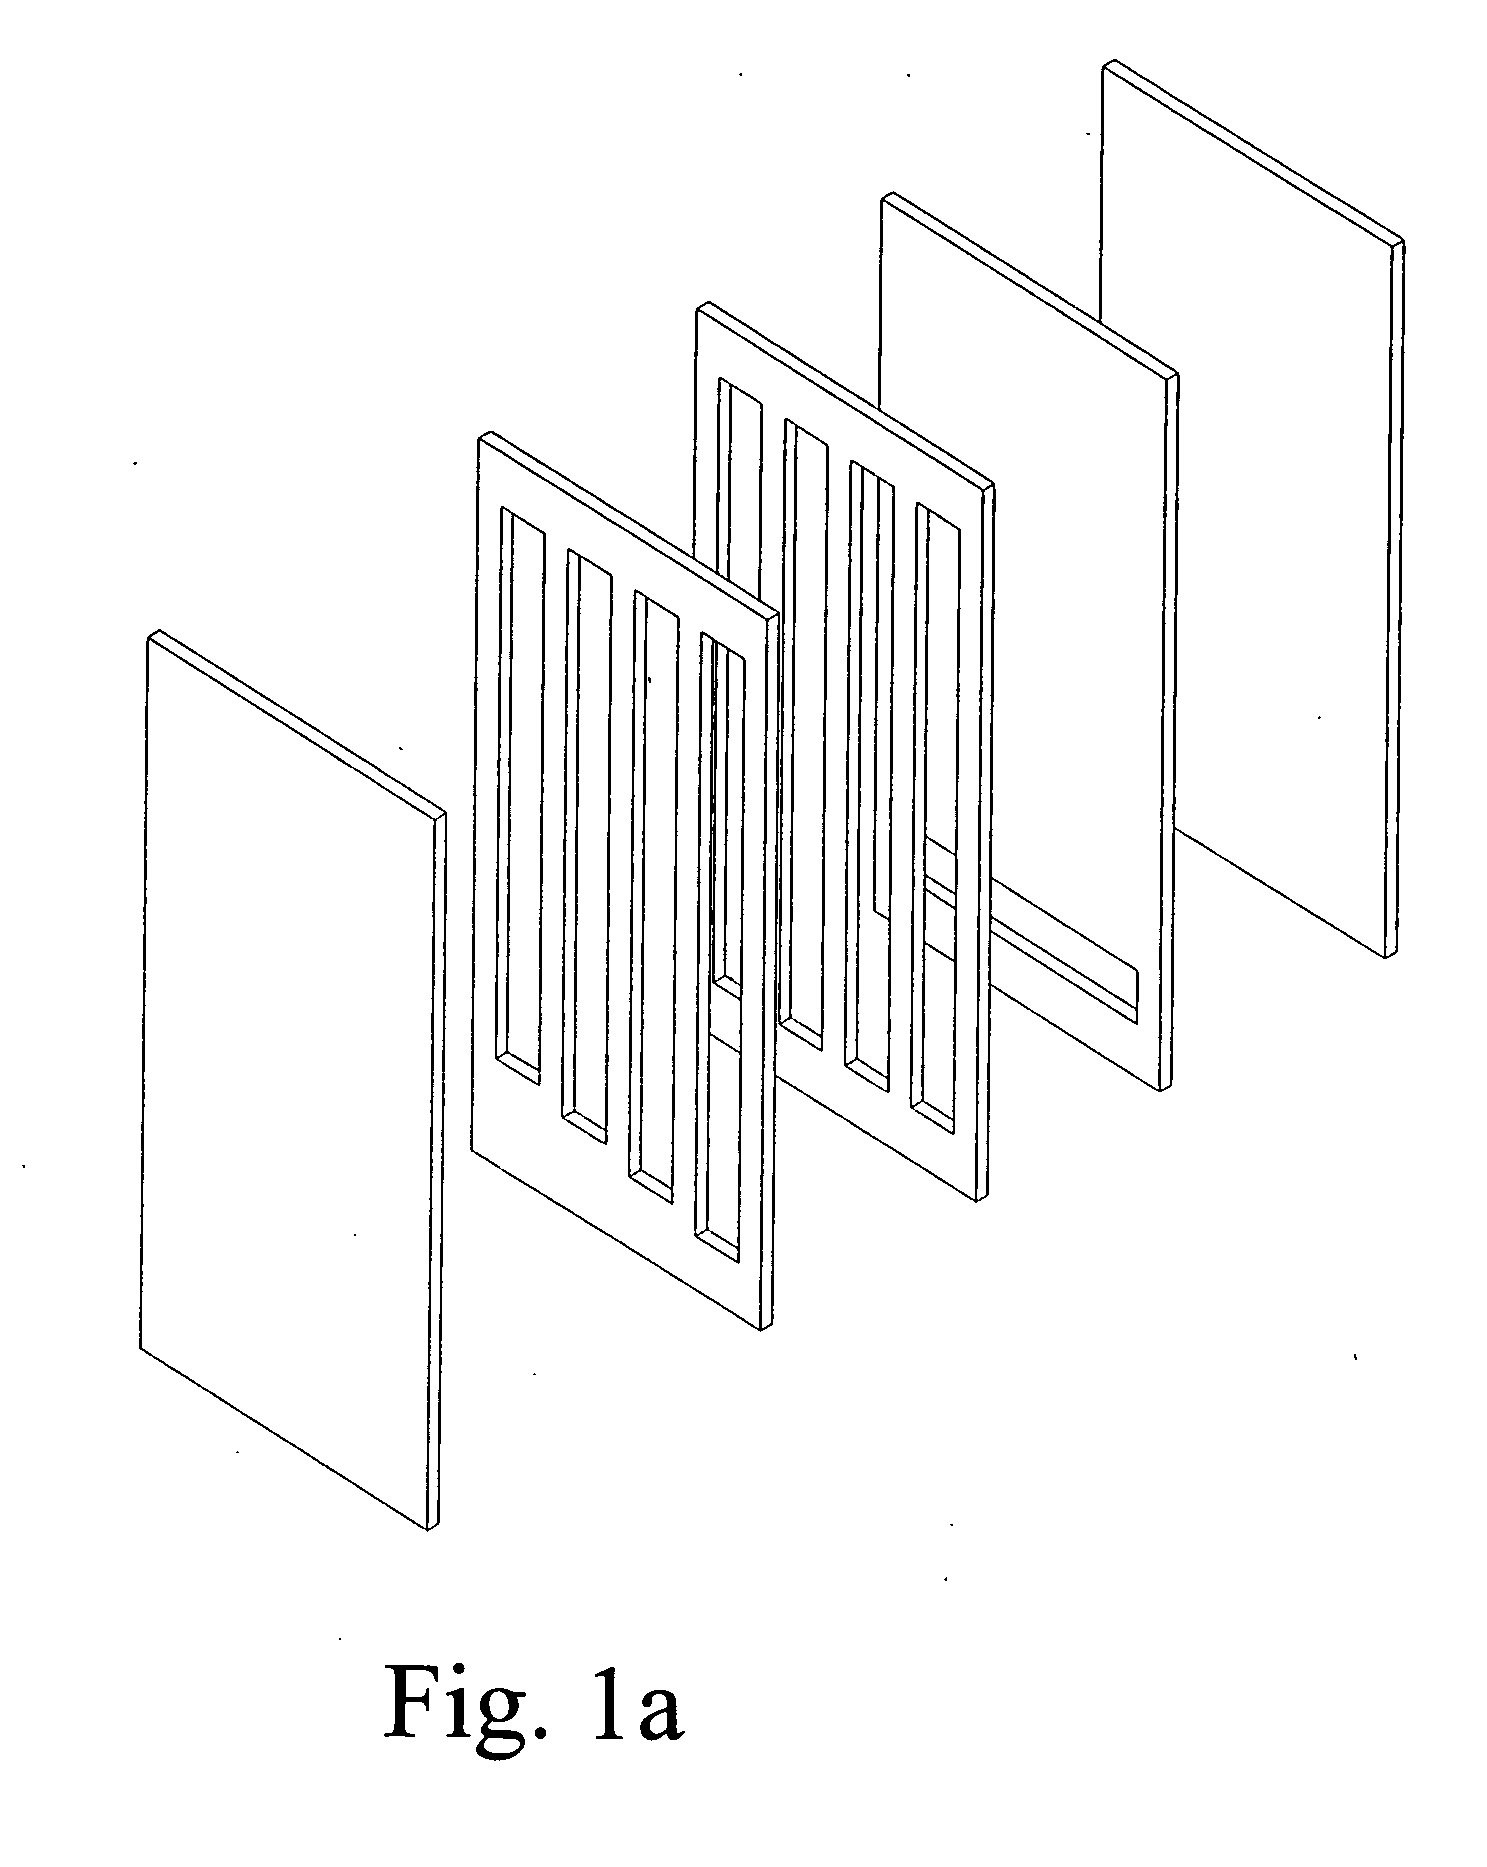 Flow control through plural, parallel connecting channels to/from a manifold